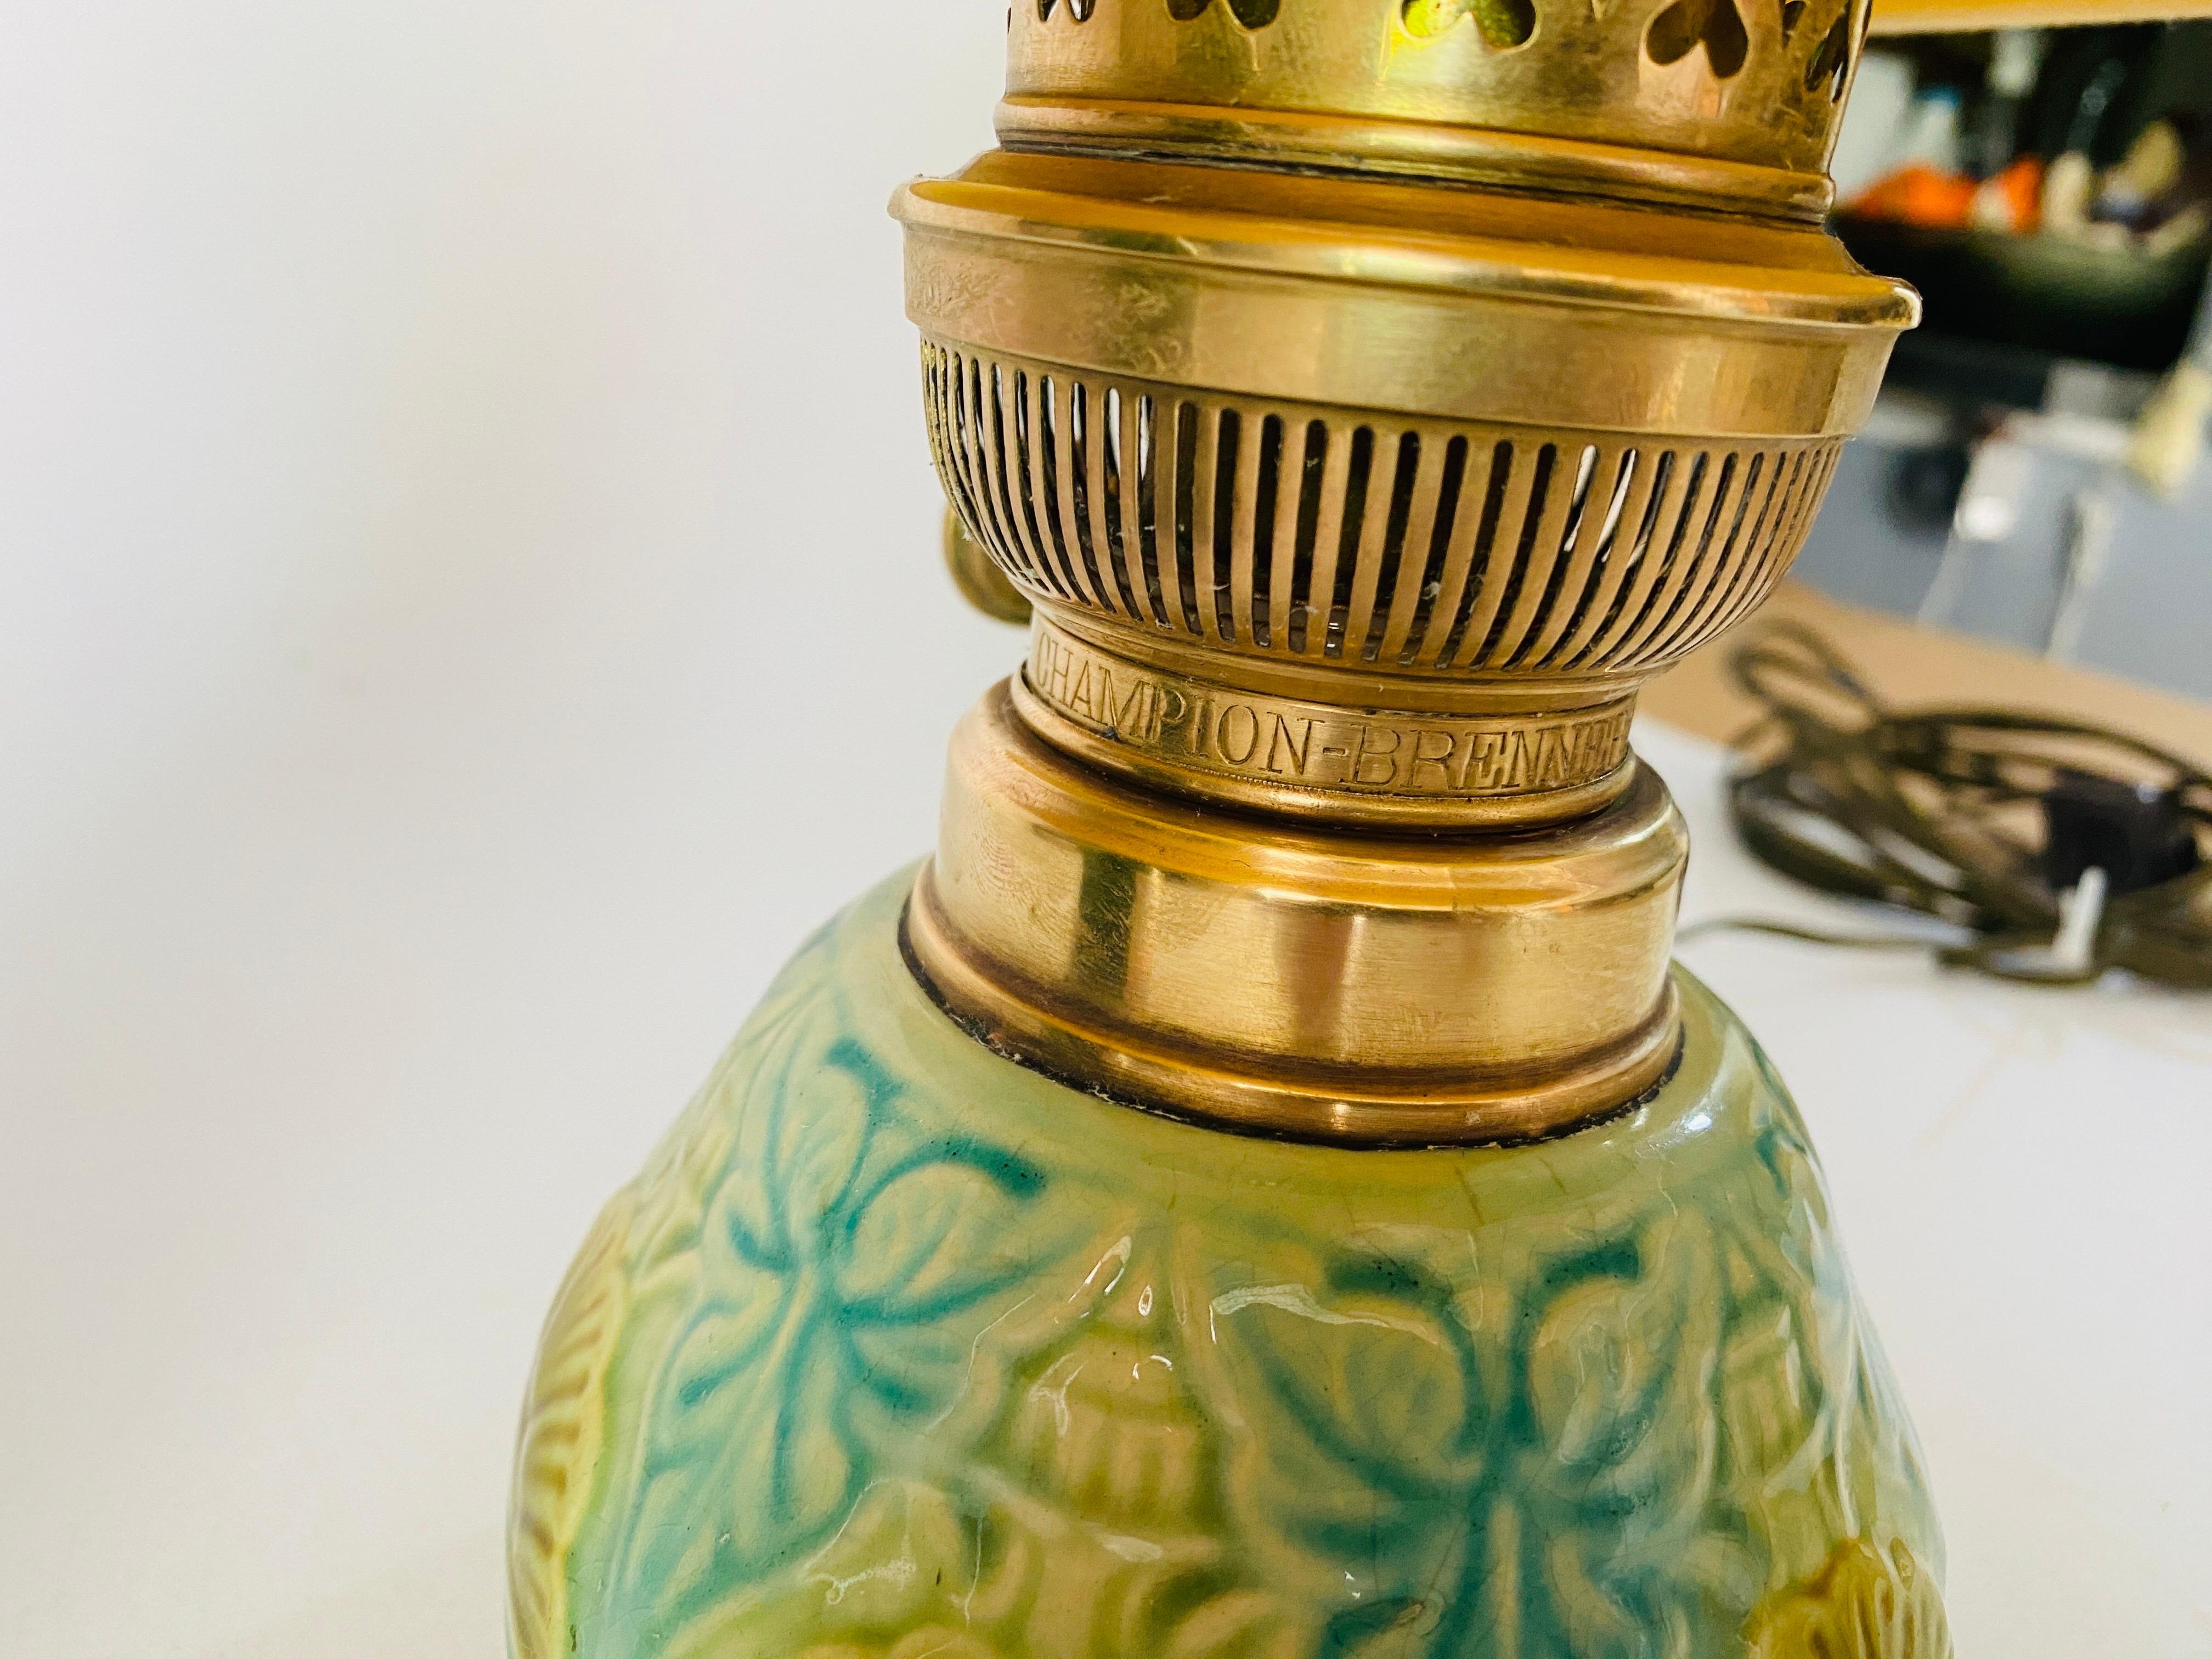 Mid-Century Modern Majolica Lamp in Crackled Blue and Yellow Color, France, 1960 For Sale